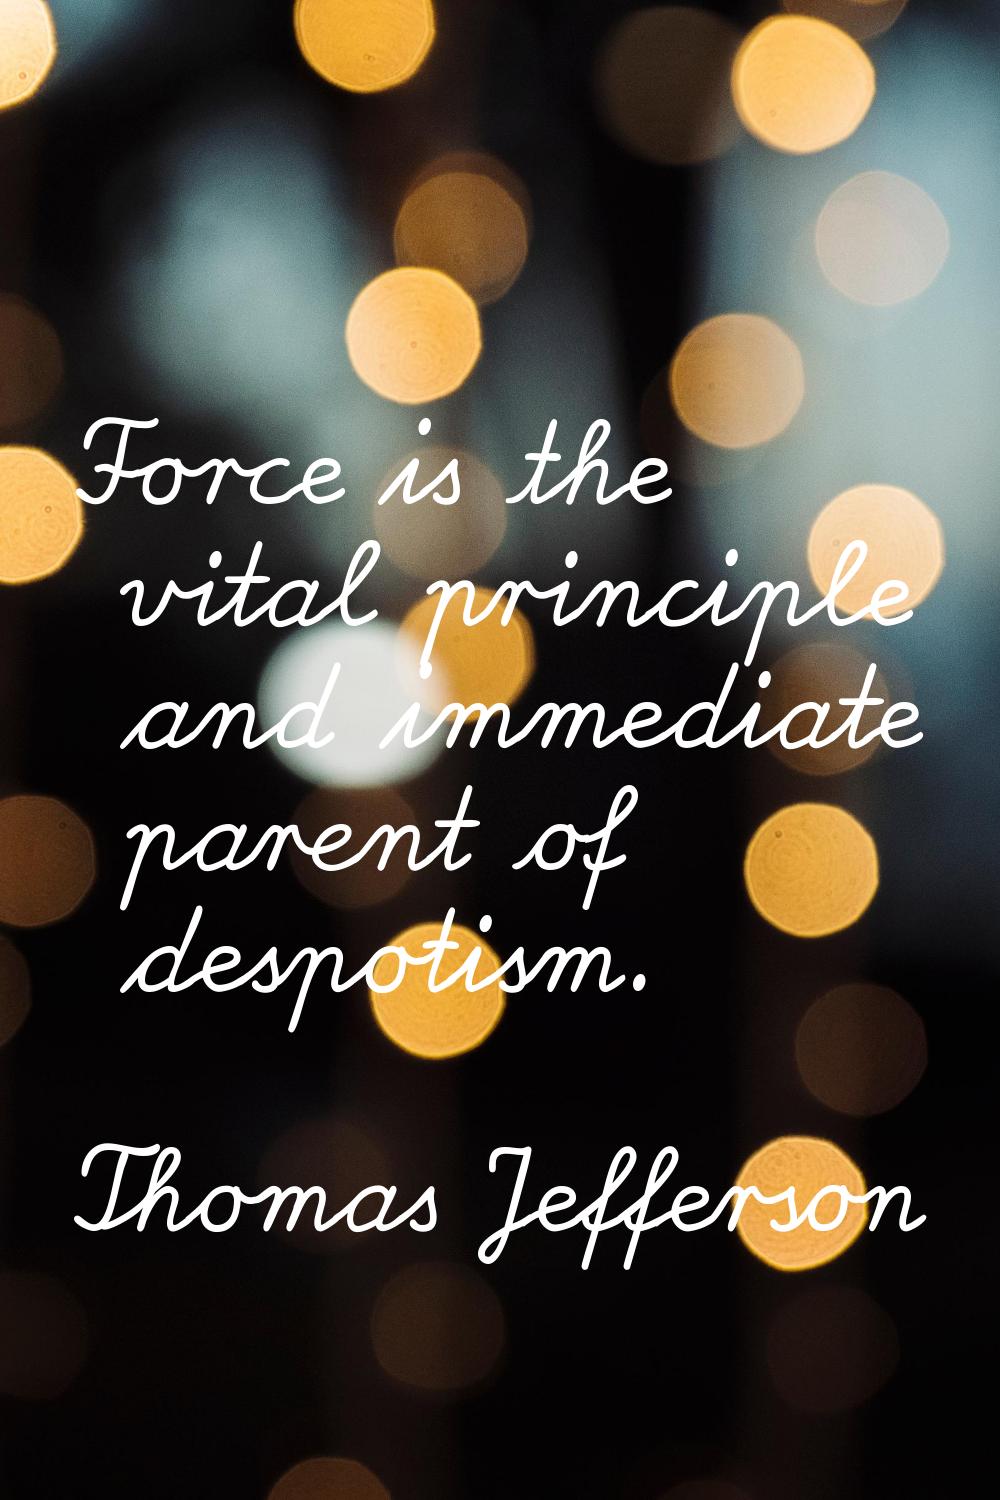 Force is the vital principle and immediate parent of despotism.